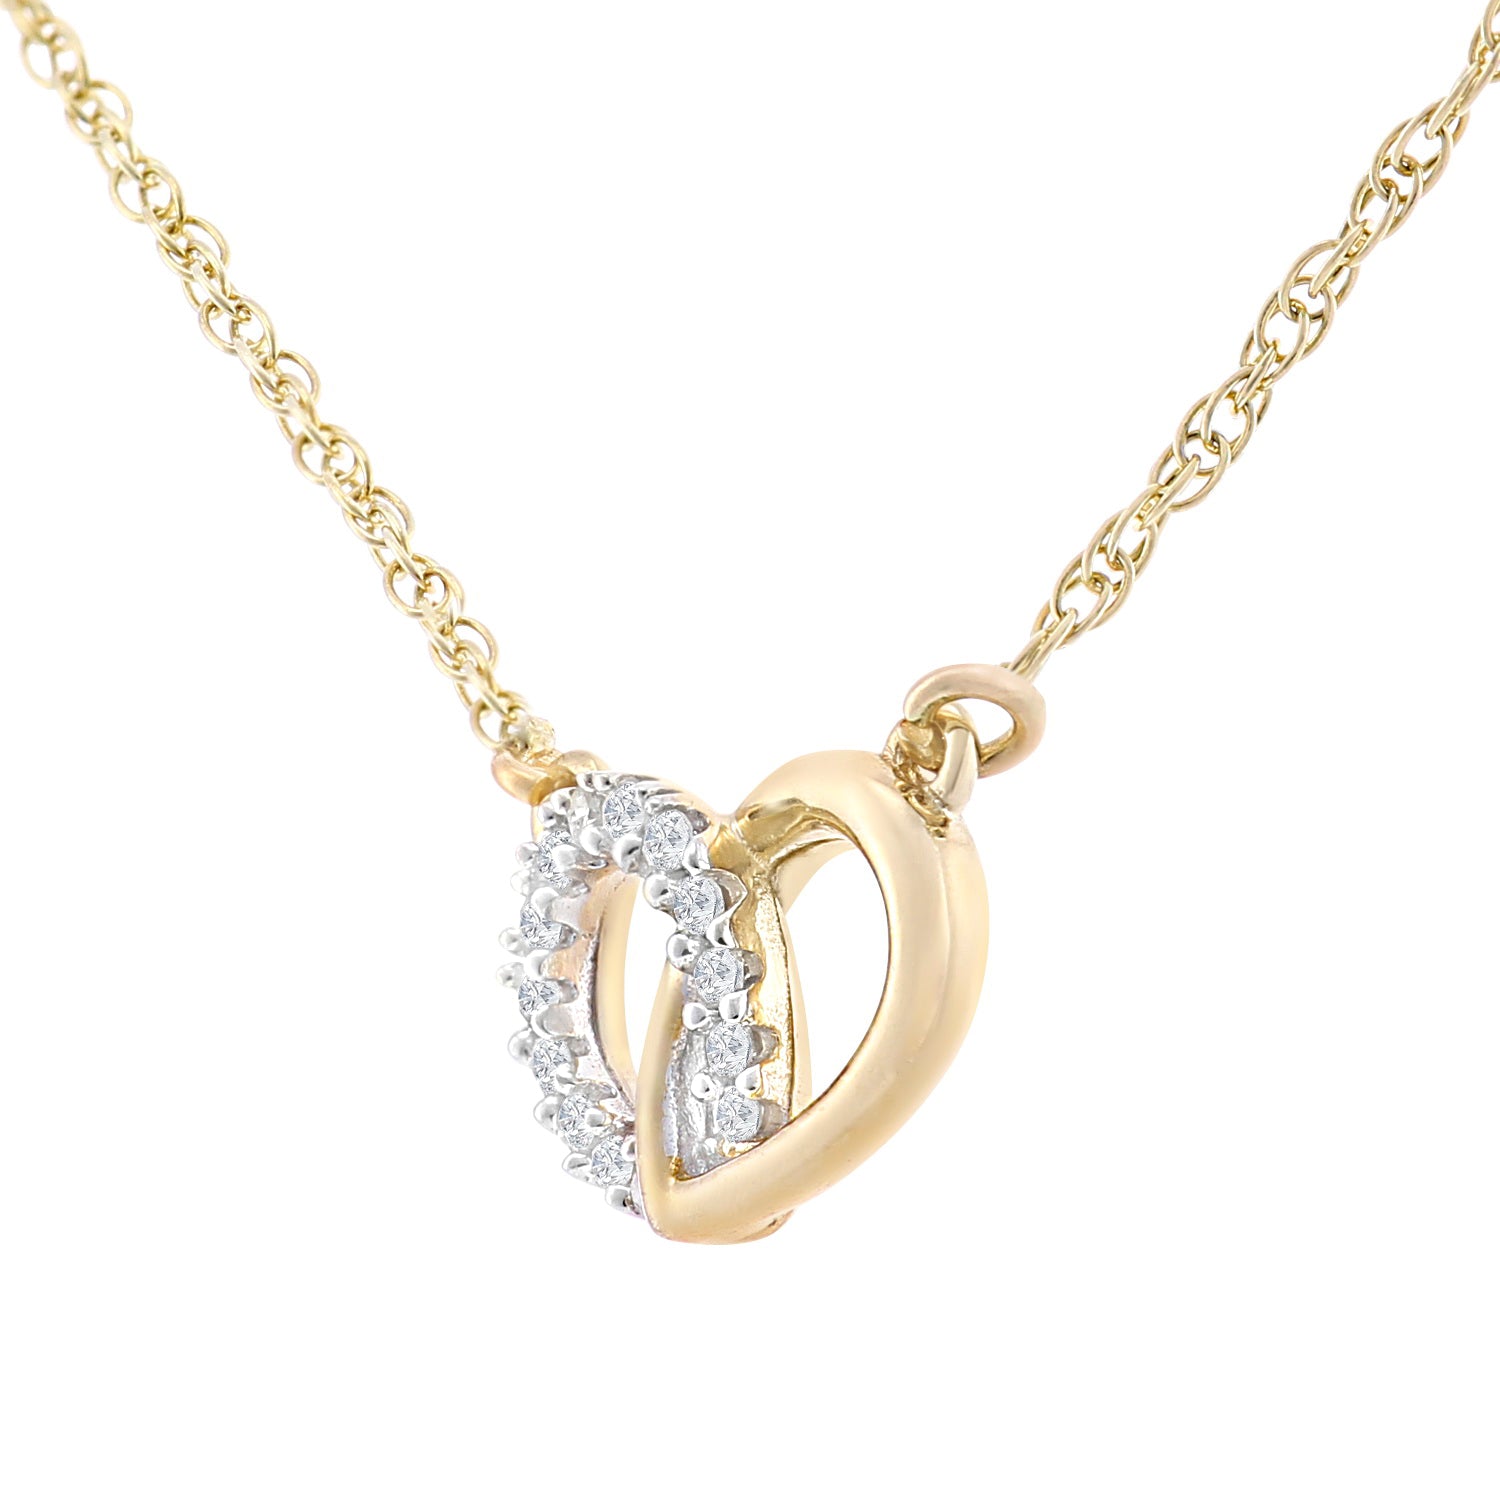 9ct Gold  Round 5pts Diamond Heart Infinity Charm Necklace 18 inch - PP0AXL5968Y